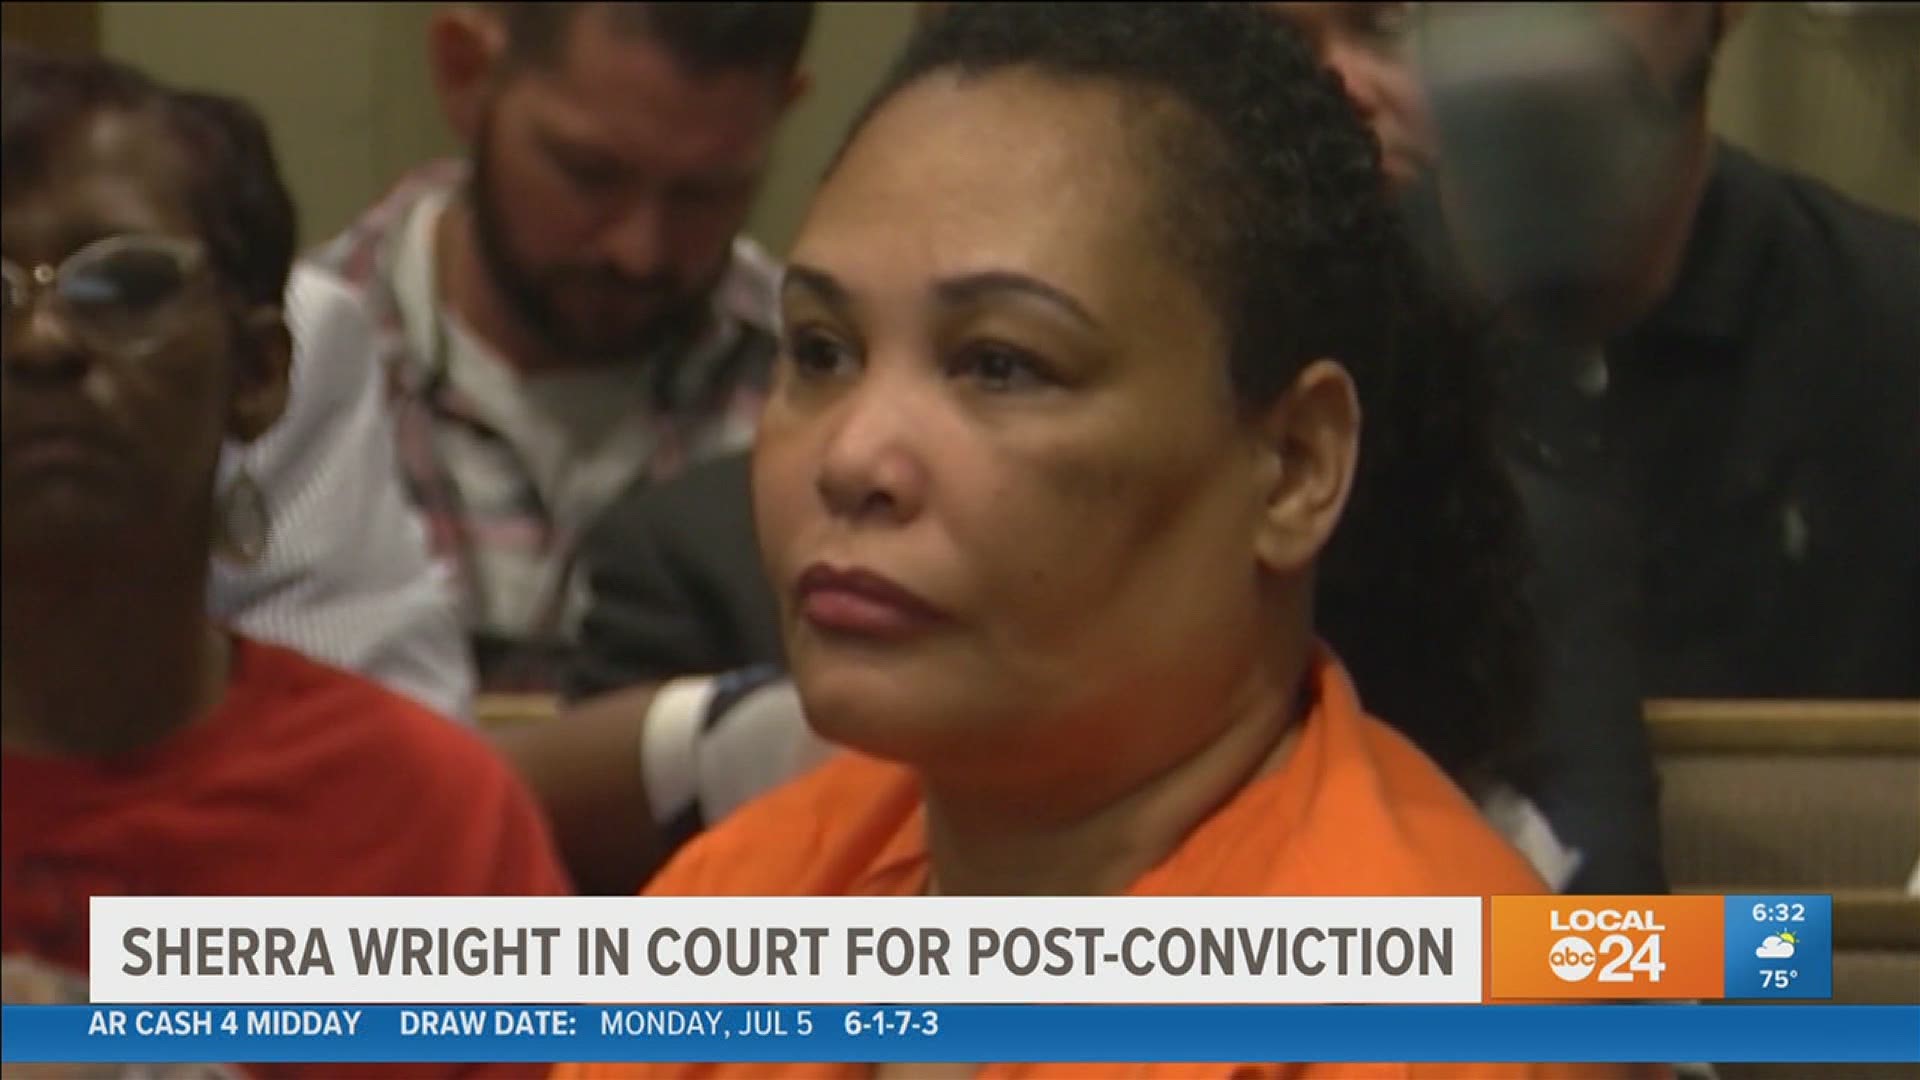 Sherra Wright pled guilty in July of 2019 to the facilitation of Lorenzen Wright's murder.